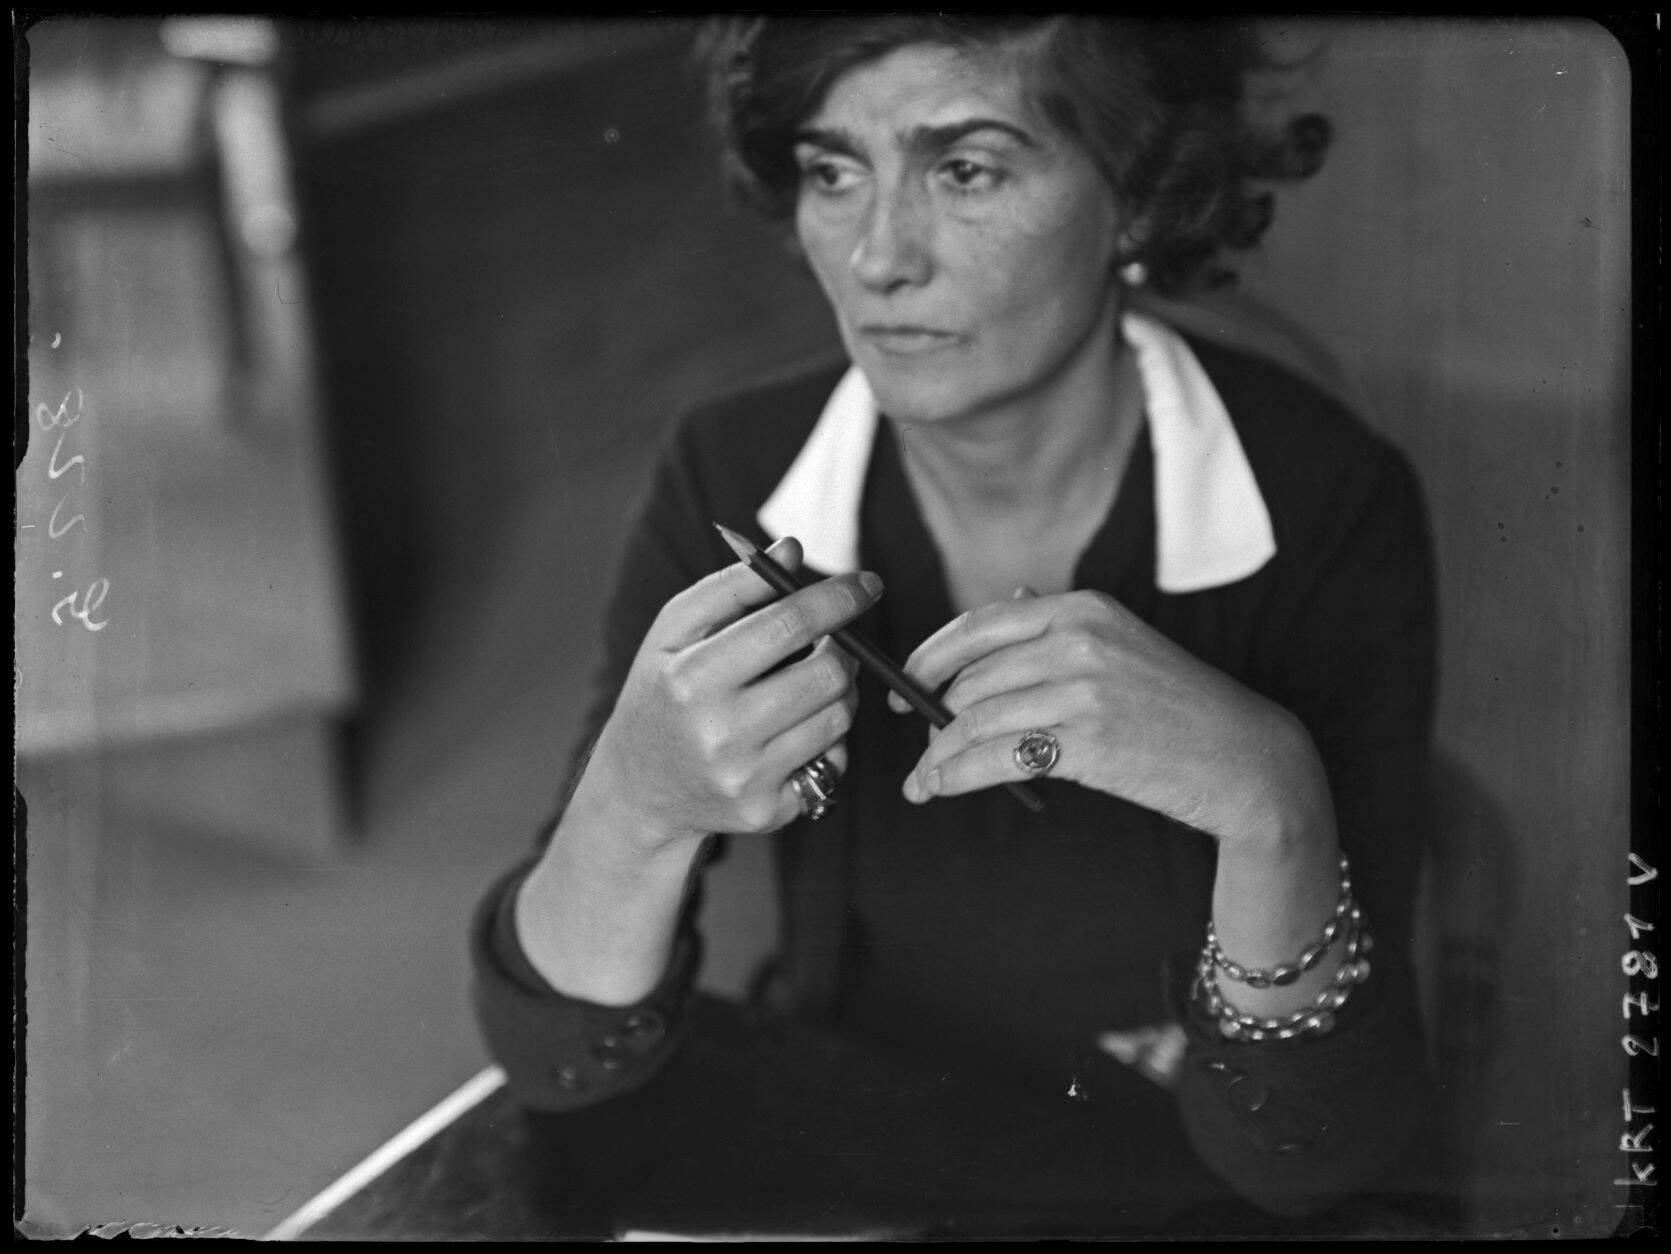 Coco Chanel's fashion brilliance for all see in new exhibition, The Senior